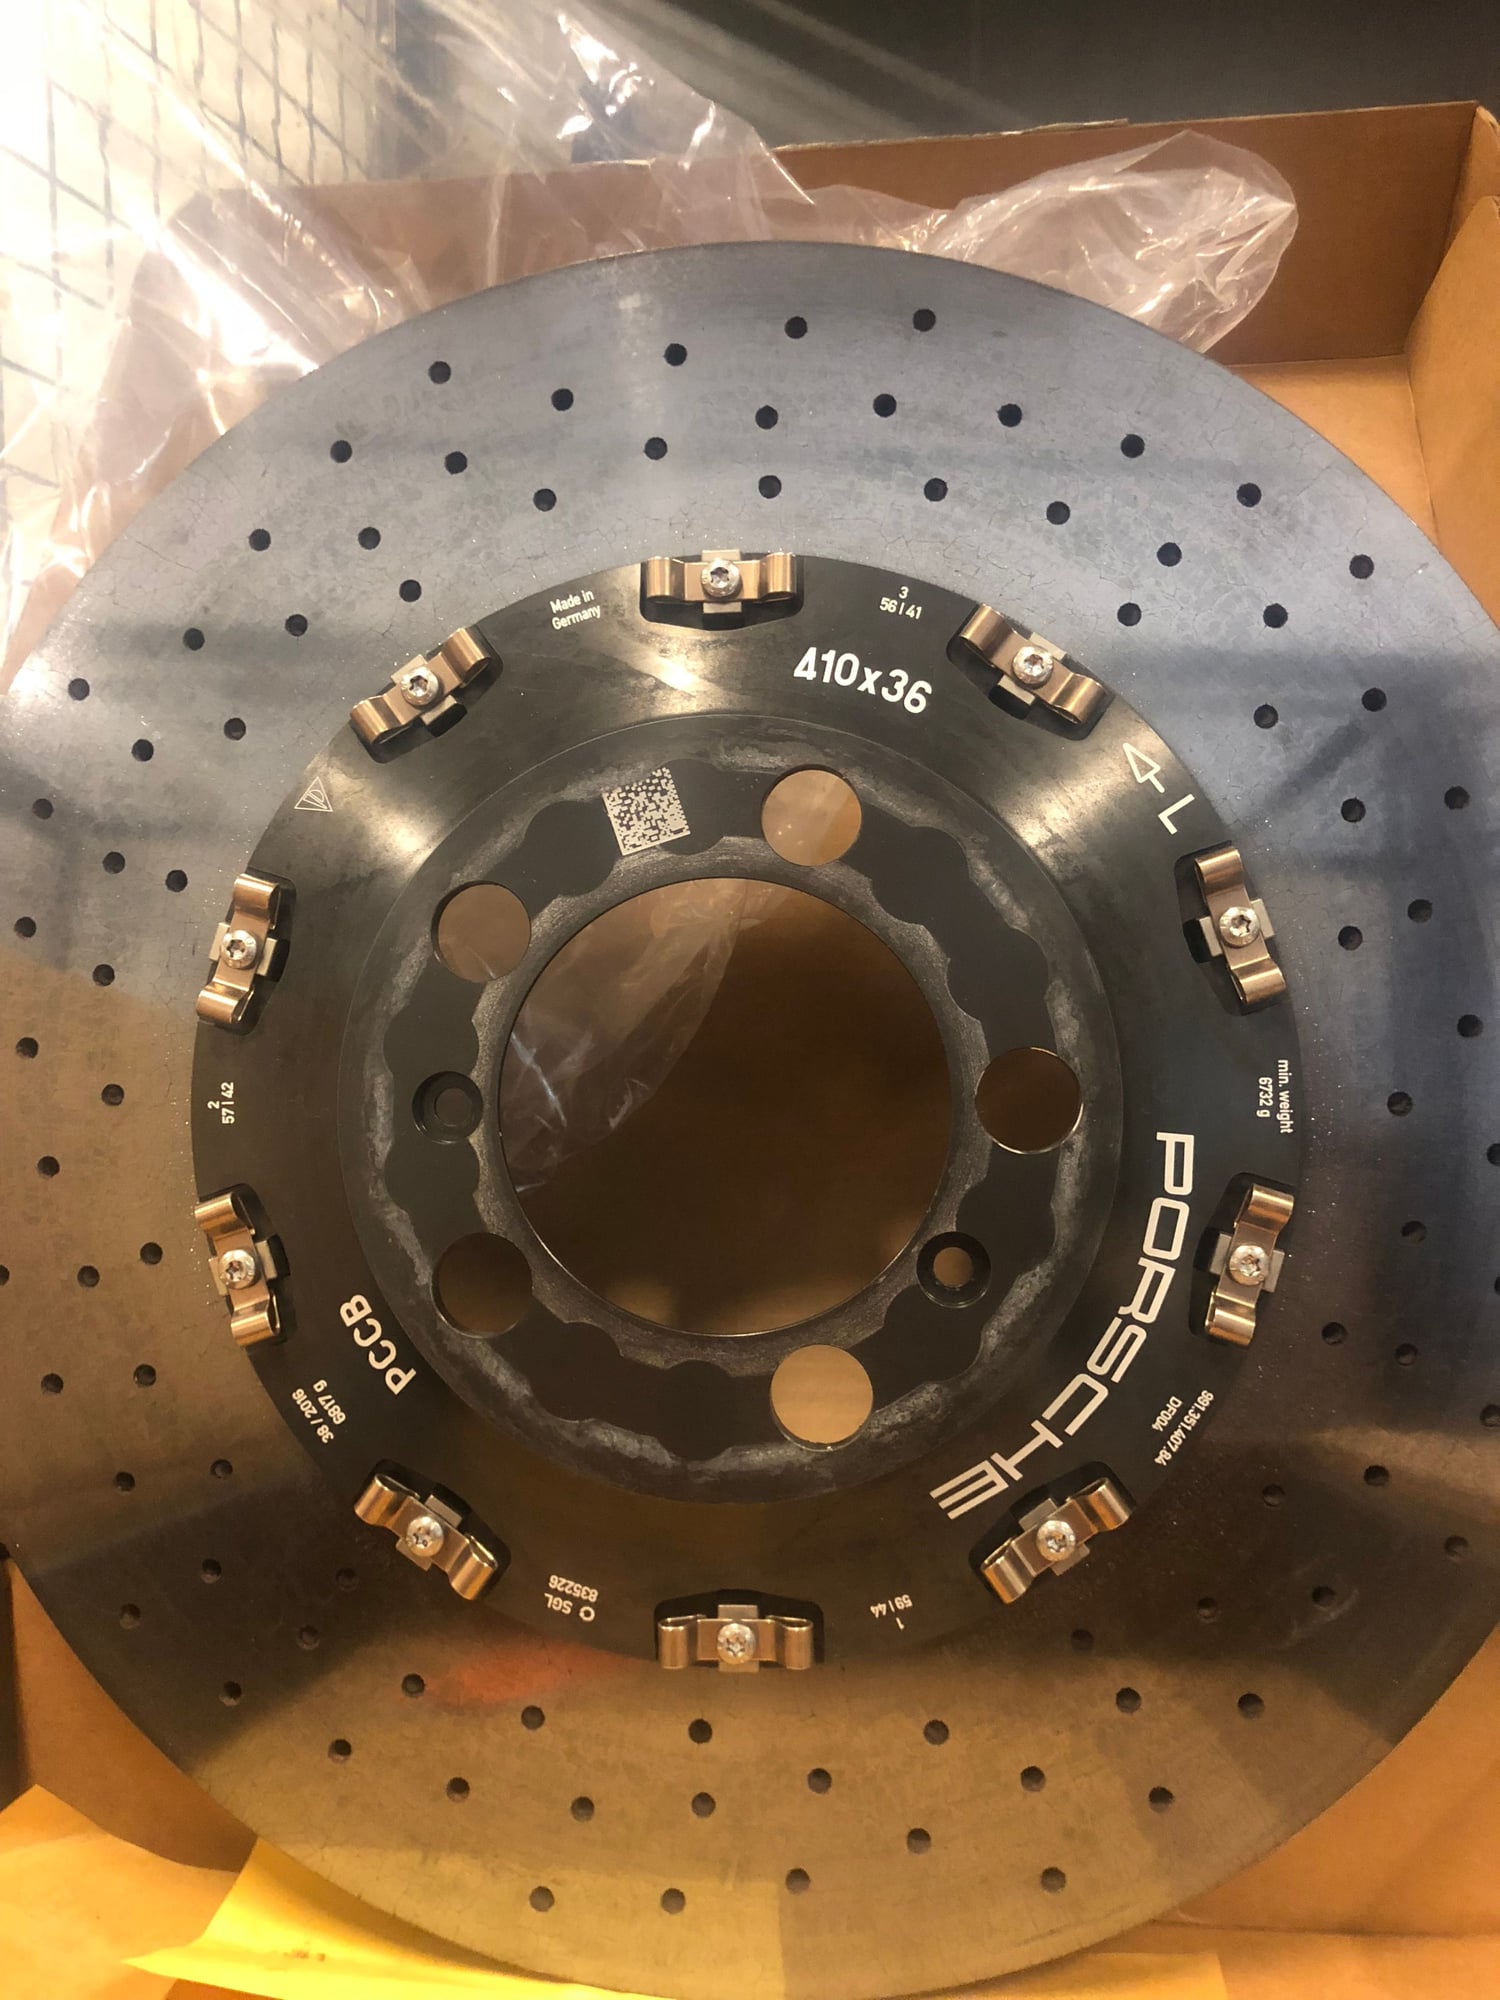 Brakes - PCCB Rotors for sale-Full Set of 4 for 991 GT3, 3RS, 911R or 2RS - Used - 2014 to 2019 Porsche GT3 - Phoenix, AZ 85297, United States